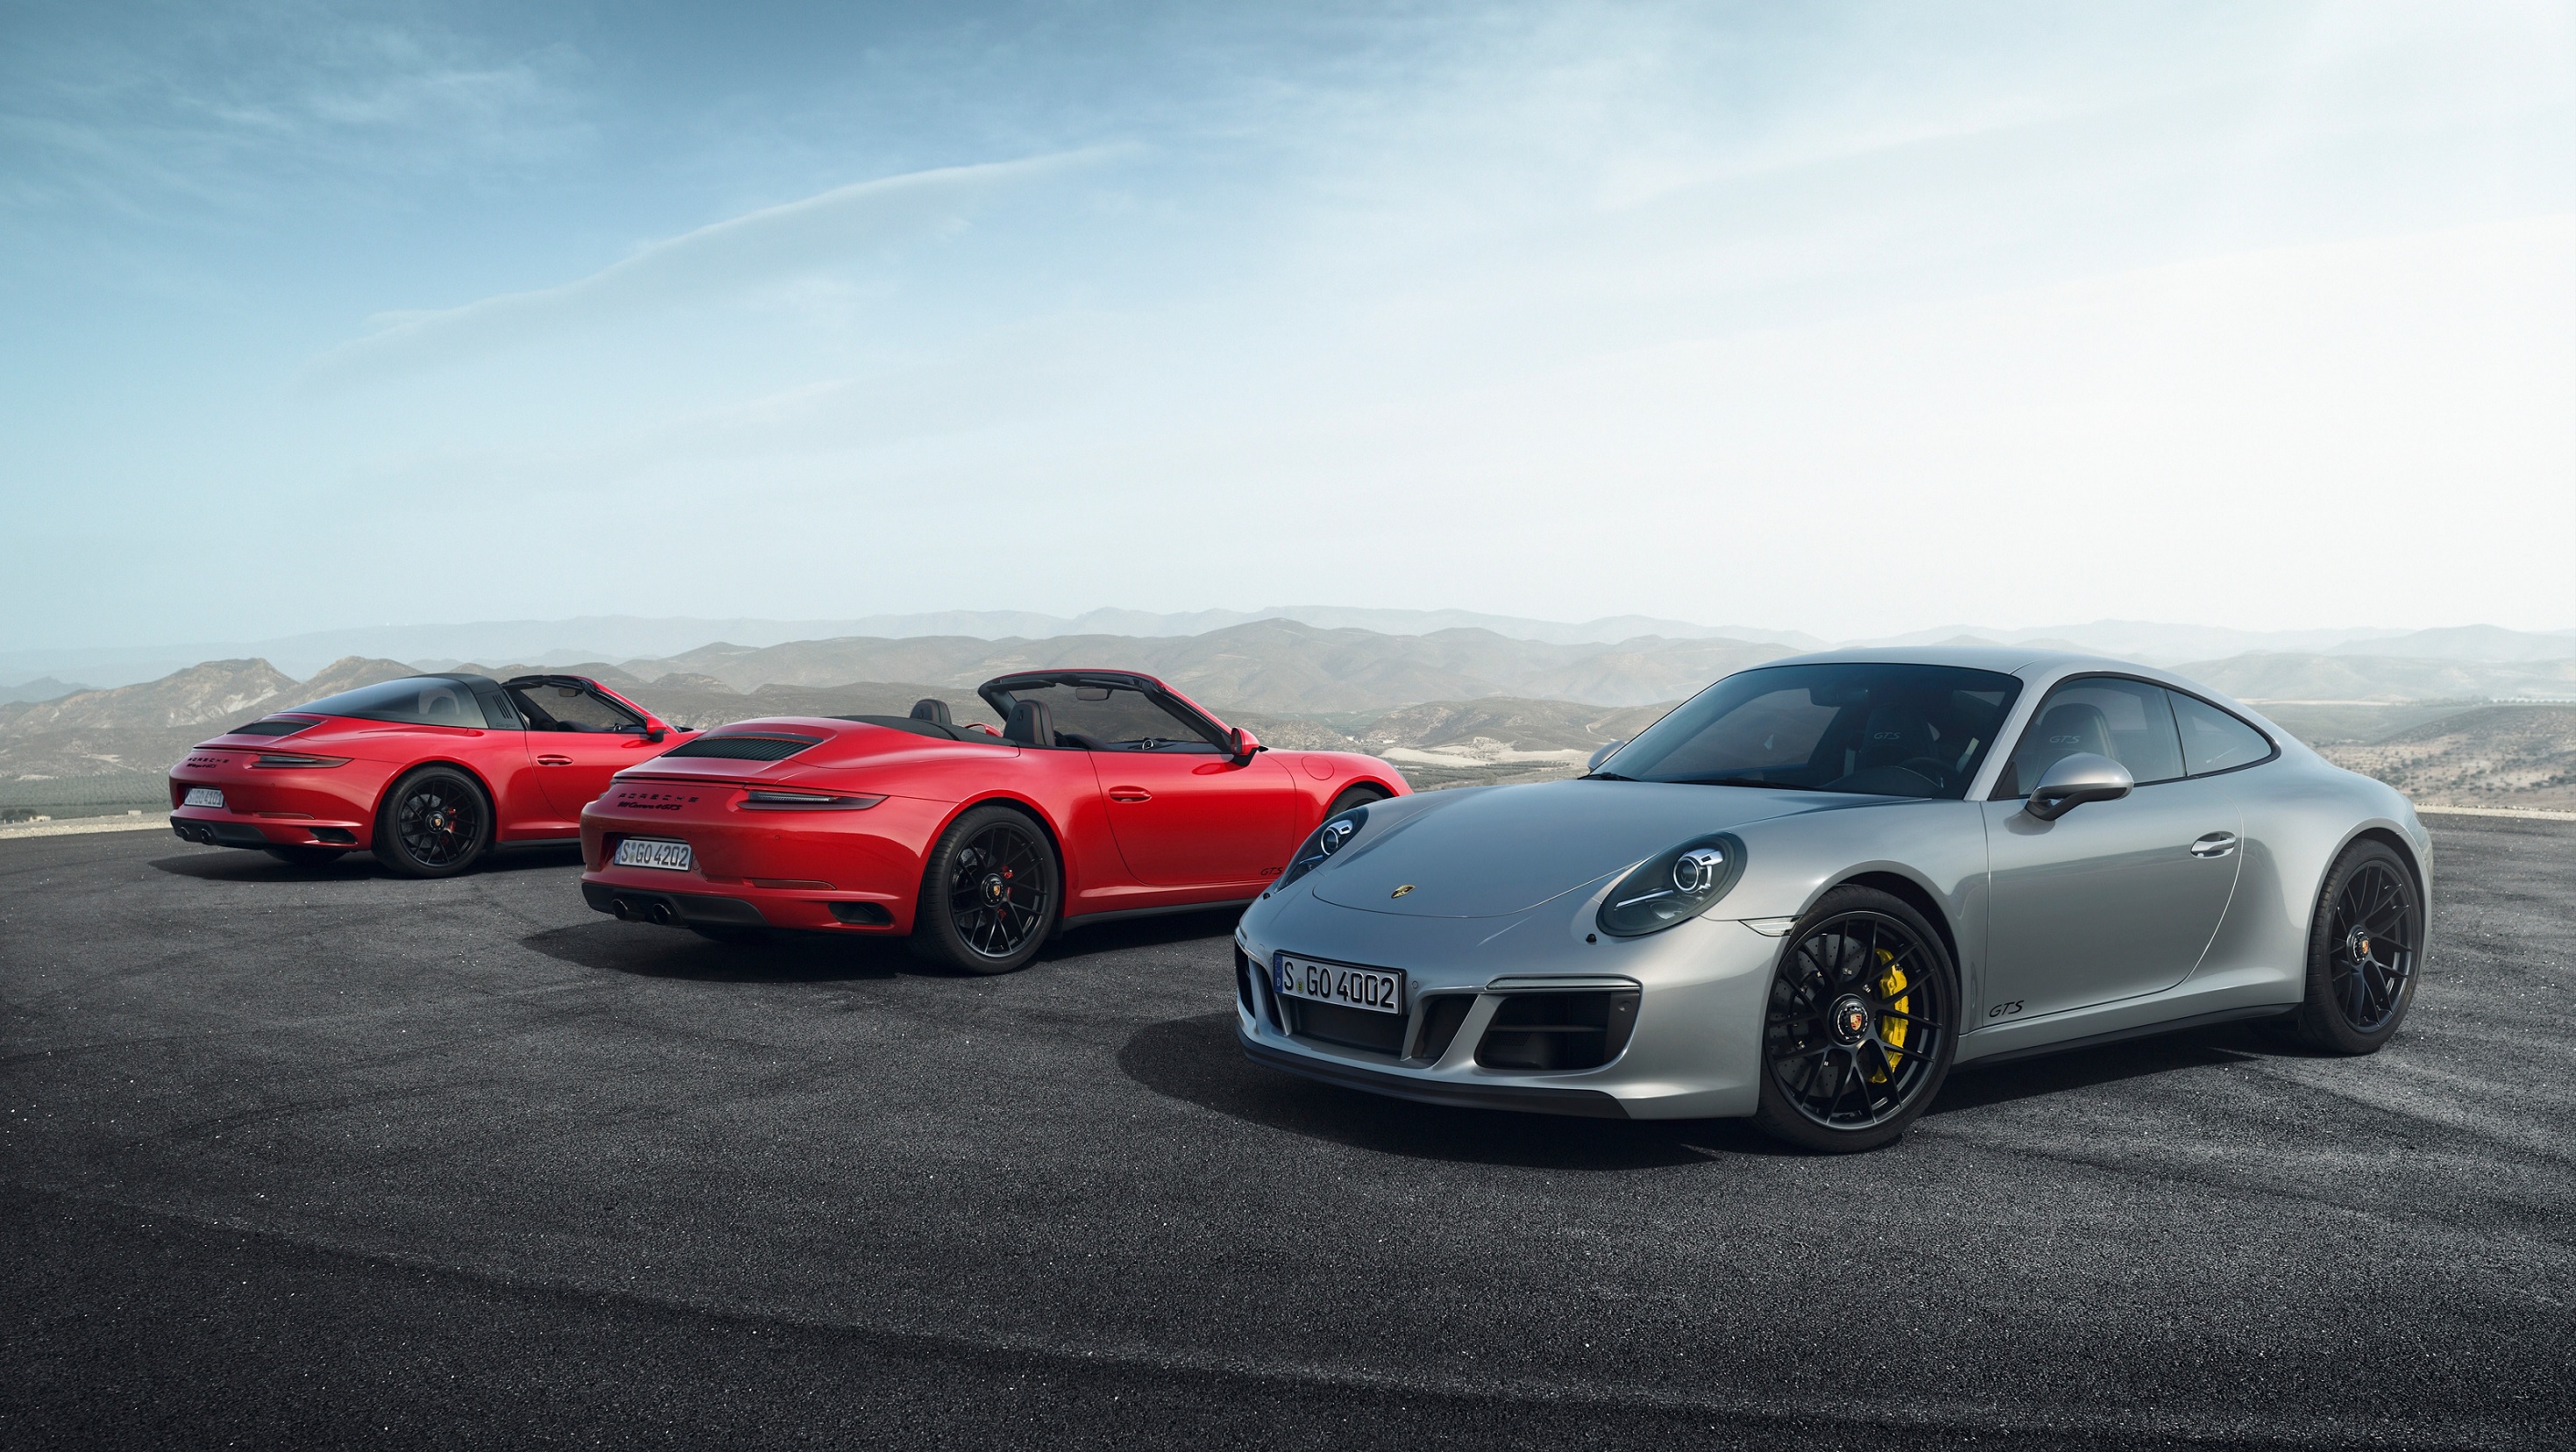 From left to right, a red 2017 Porsche 991.2 911 Targa 4 GTS, red Carrera 4 GTS Cabriolet, and silver Carrera 4 GTS